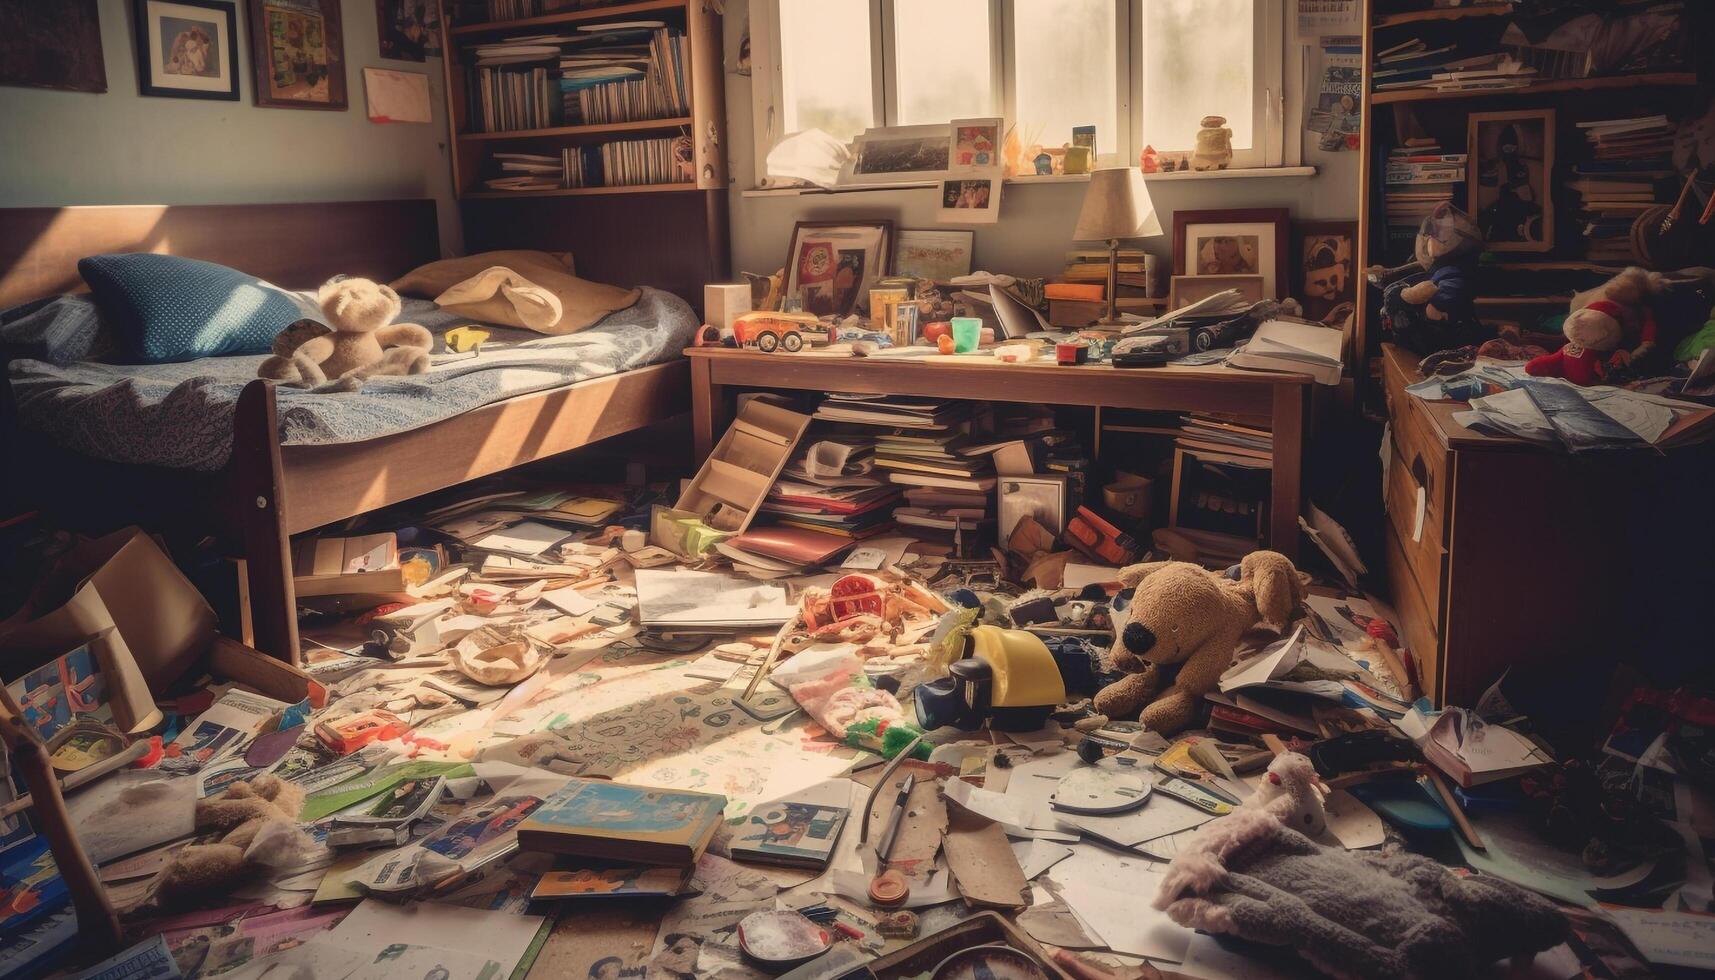 Creative chaos in a messy bedroom a modern childhood imagination generated by AI photo